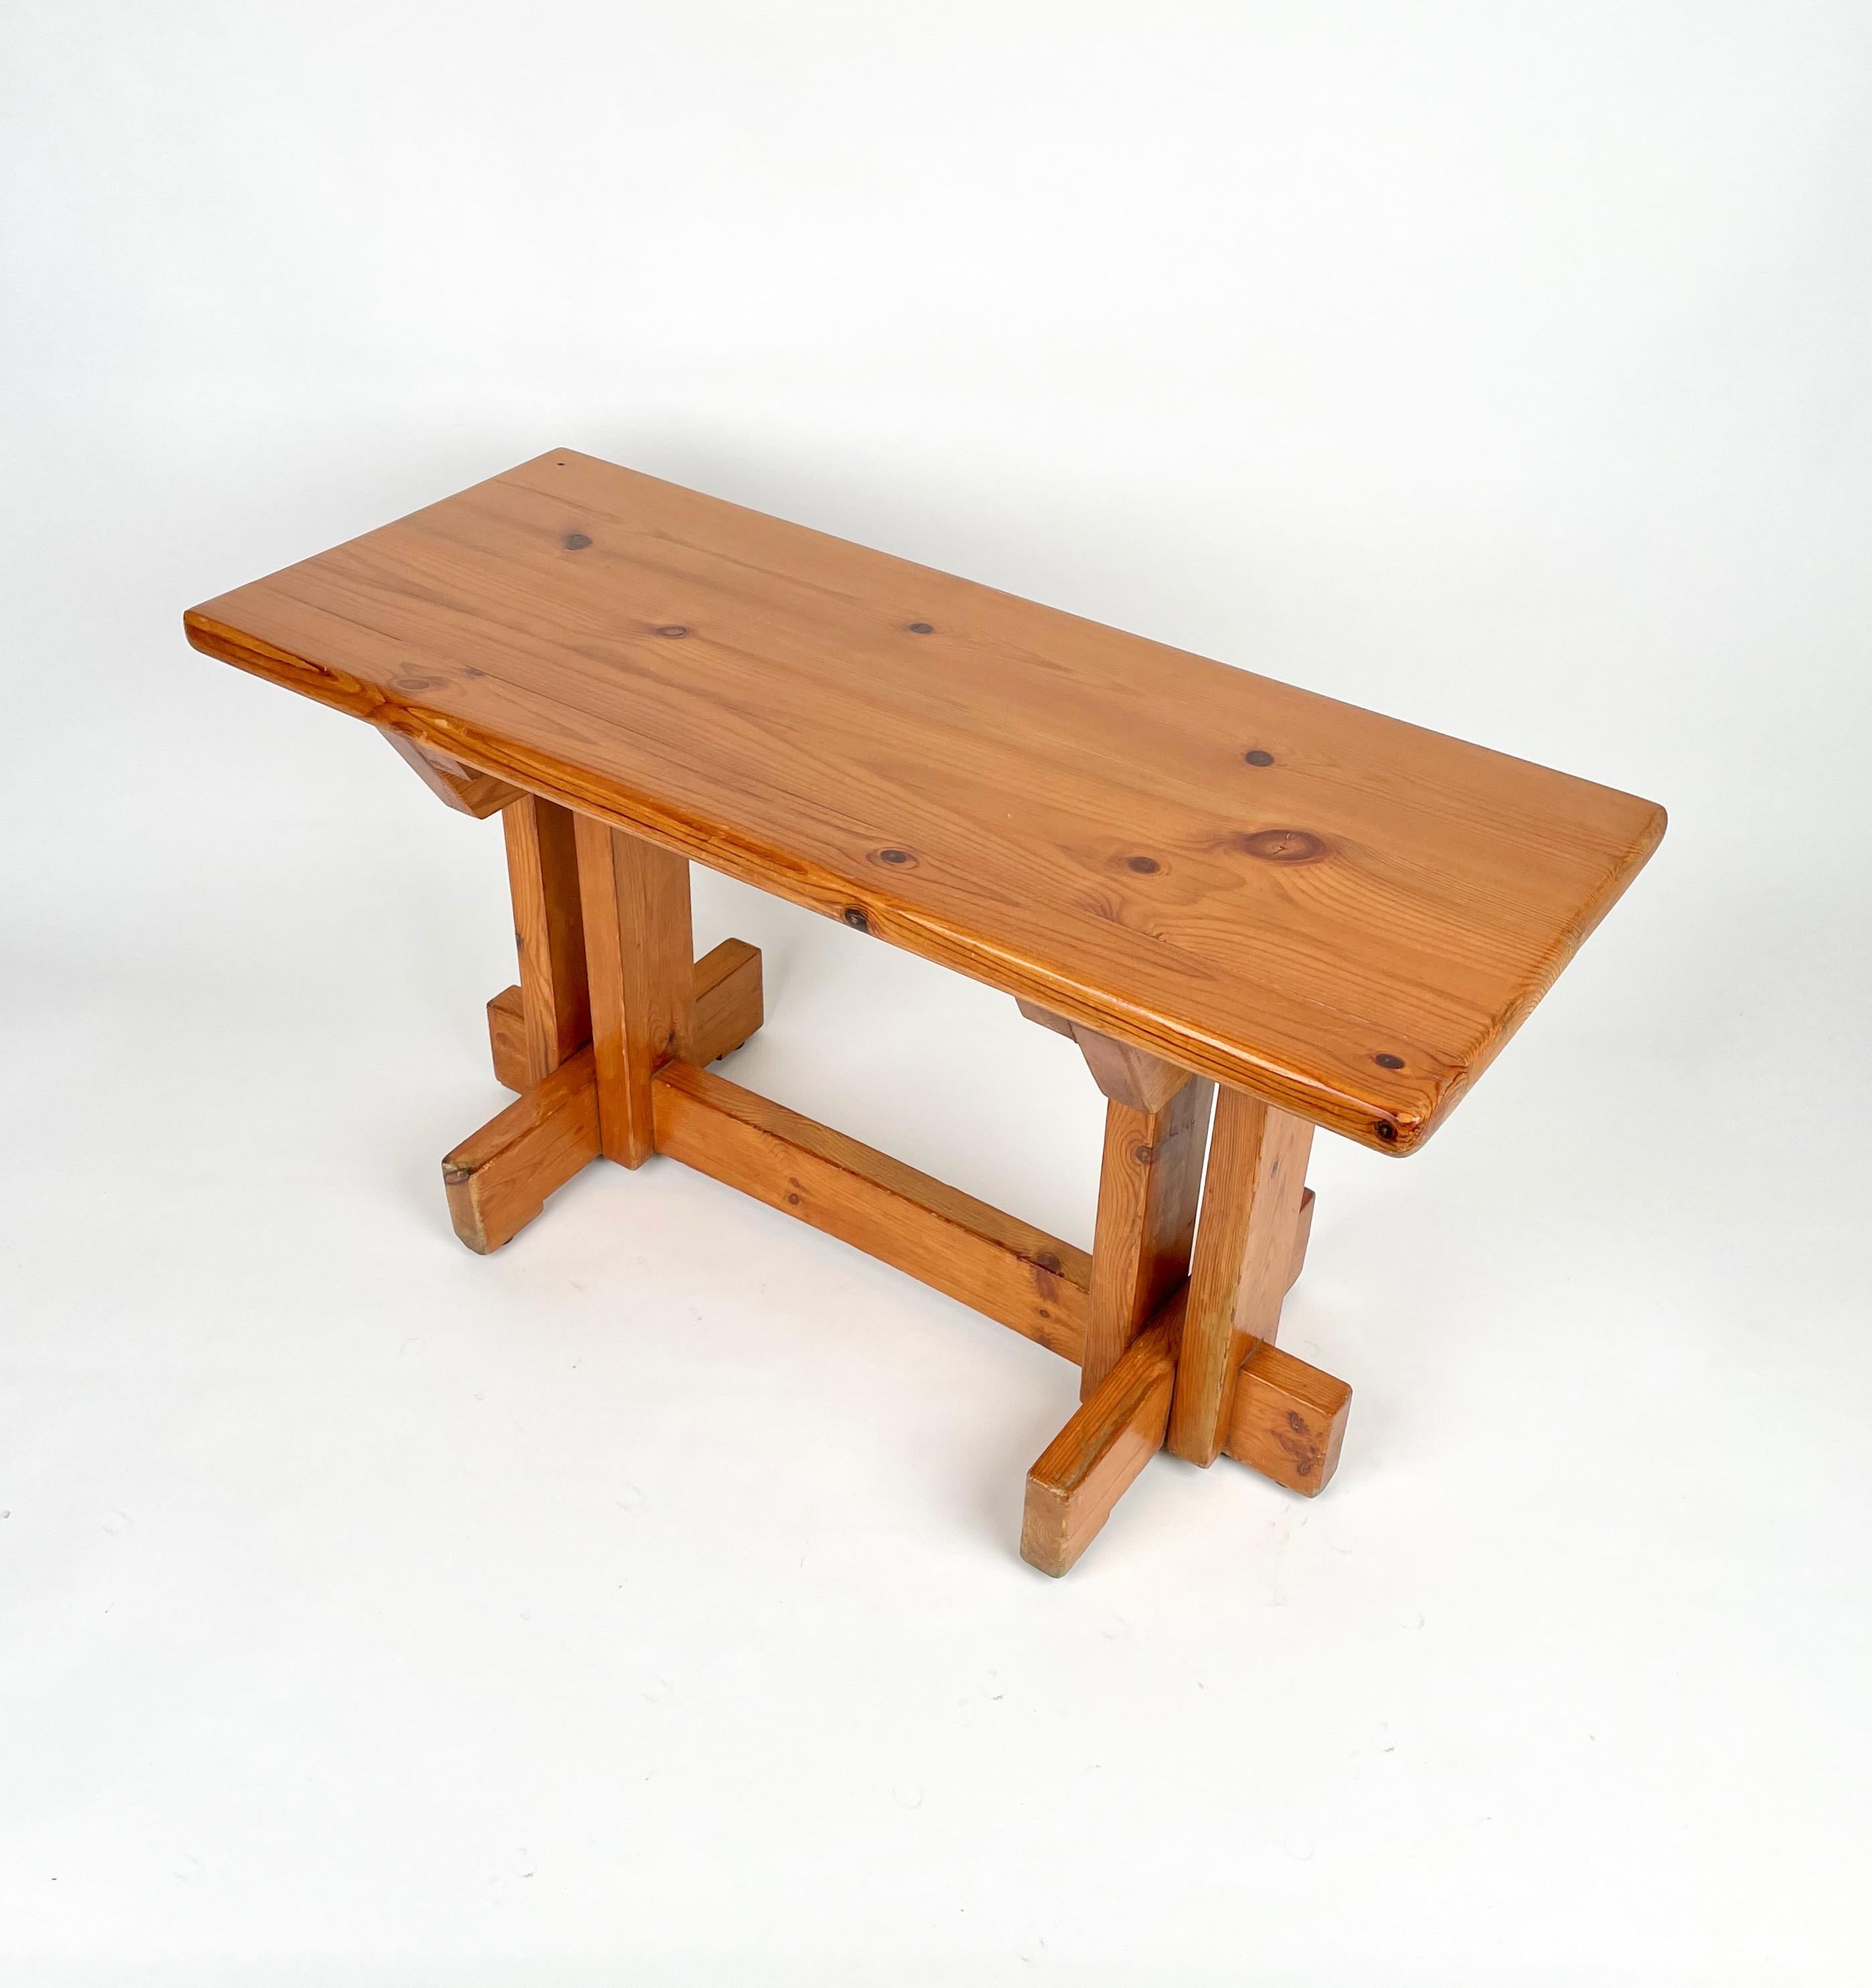 Charlotte Perriand Style Sitting Bench or Side Table in Wood Pine, France, 1970s For Sale 4